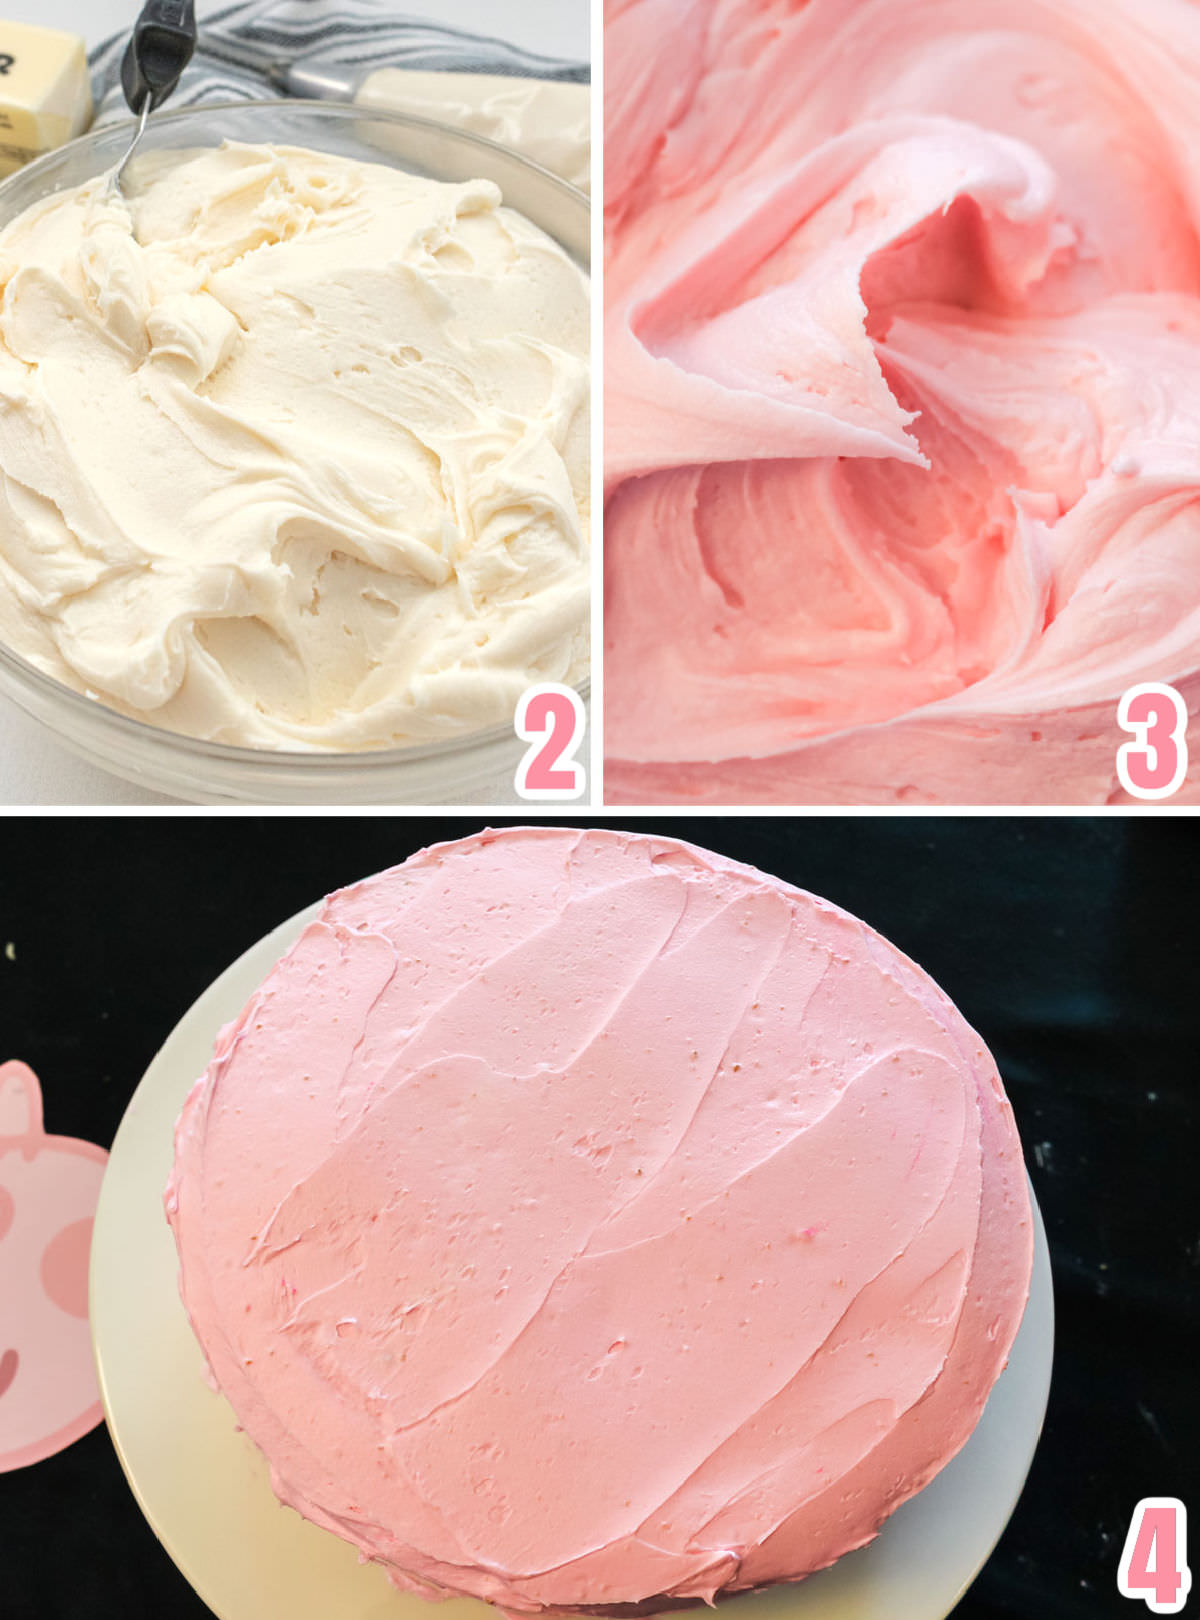 Collage image showing the steps for making buttercream frosting, tinting the frosting pink and frosting the cake.